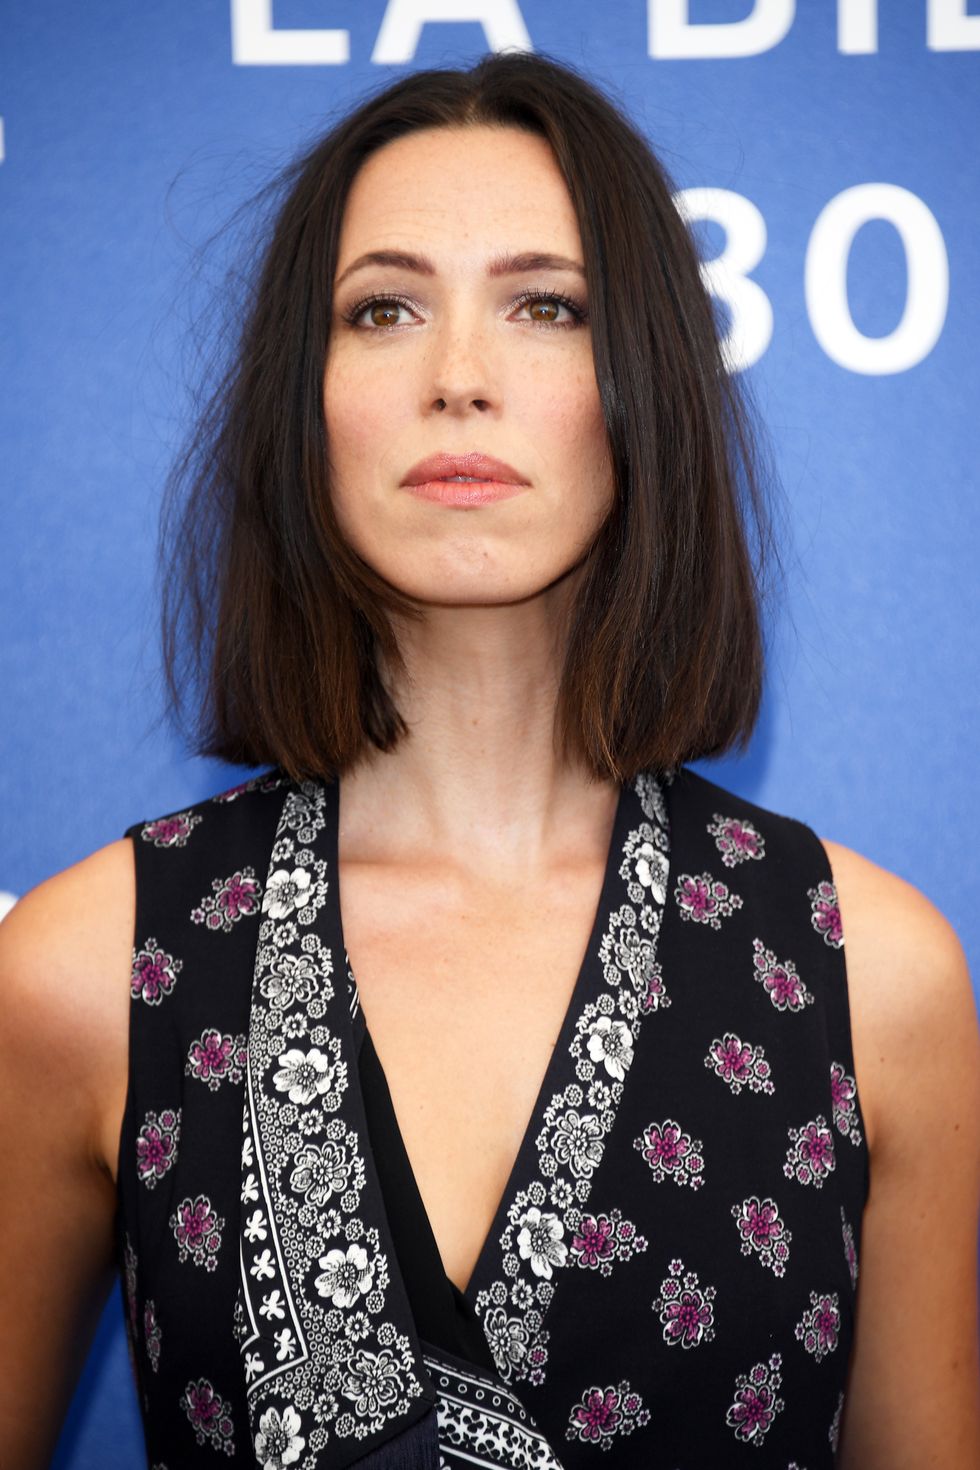 VENICE, ITALY - AUGUST 30:  'Venezia 74' jury member Rebecca Hall attends the Jury photocall during the 74th Venice Film Festival at Sala Casino on August 30, 2017 in Venice, Italy.  (Photo by Venturelli/WireImage)